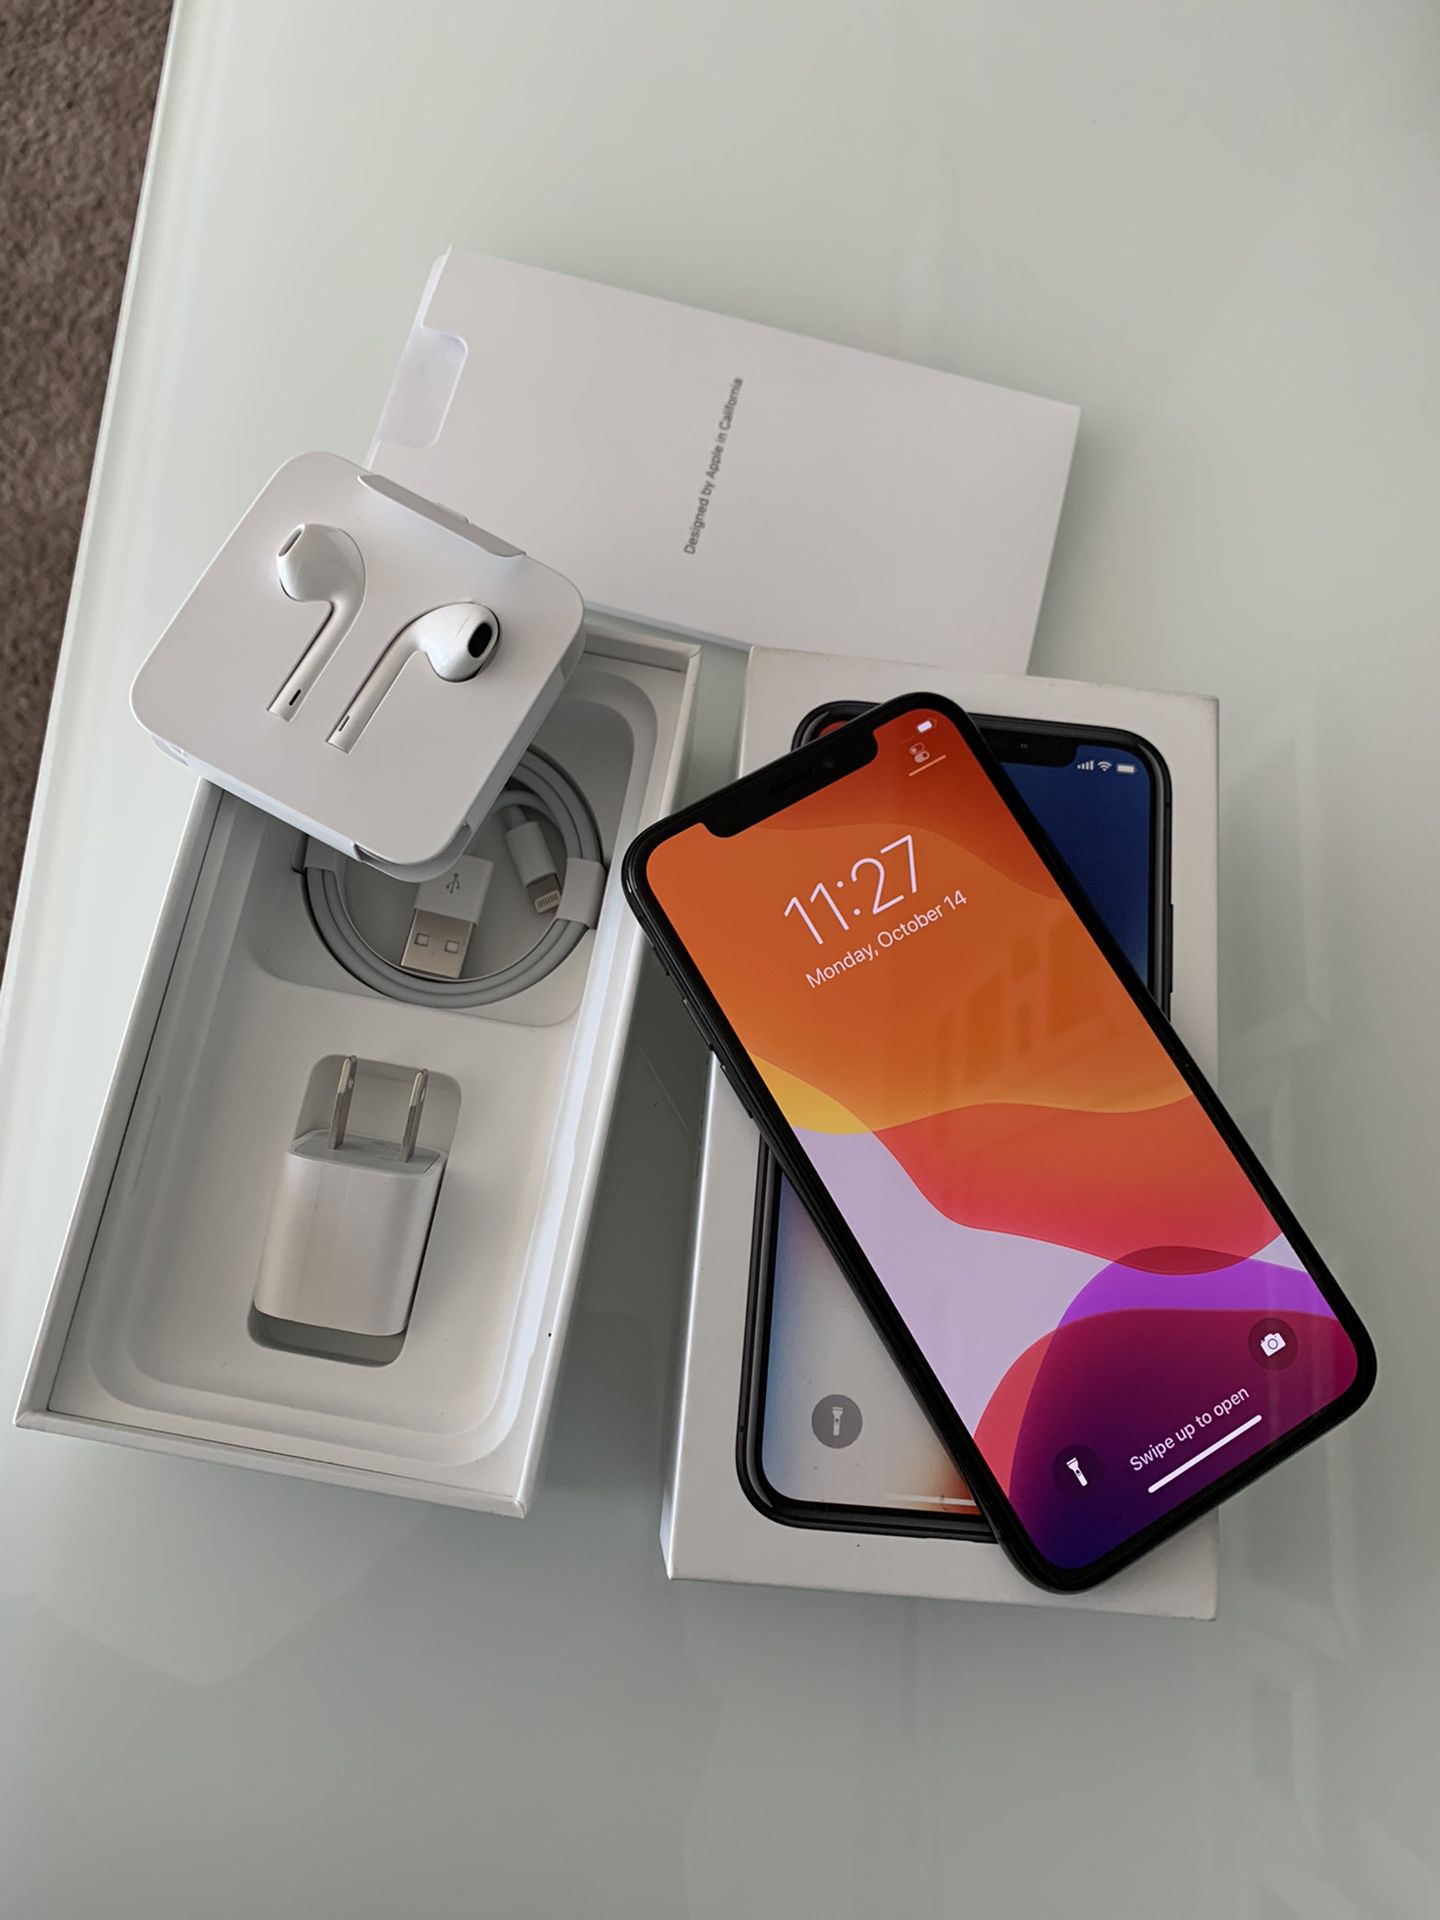 Iphone X Brand New Factory Unlock For any company